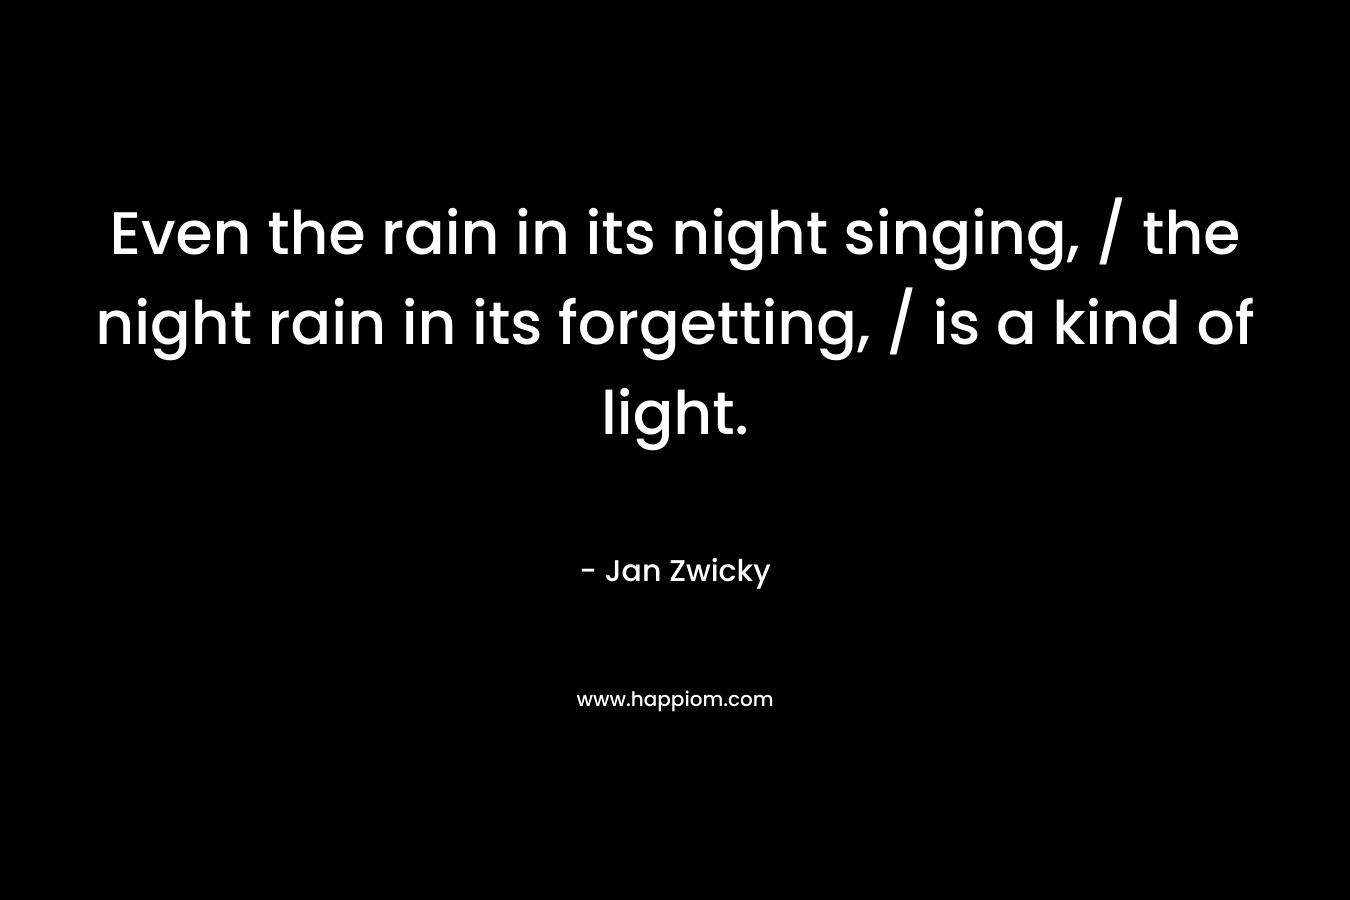 Even the rain in its night singing, / the night rain in its forgetting, / is a kind of light.